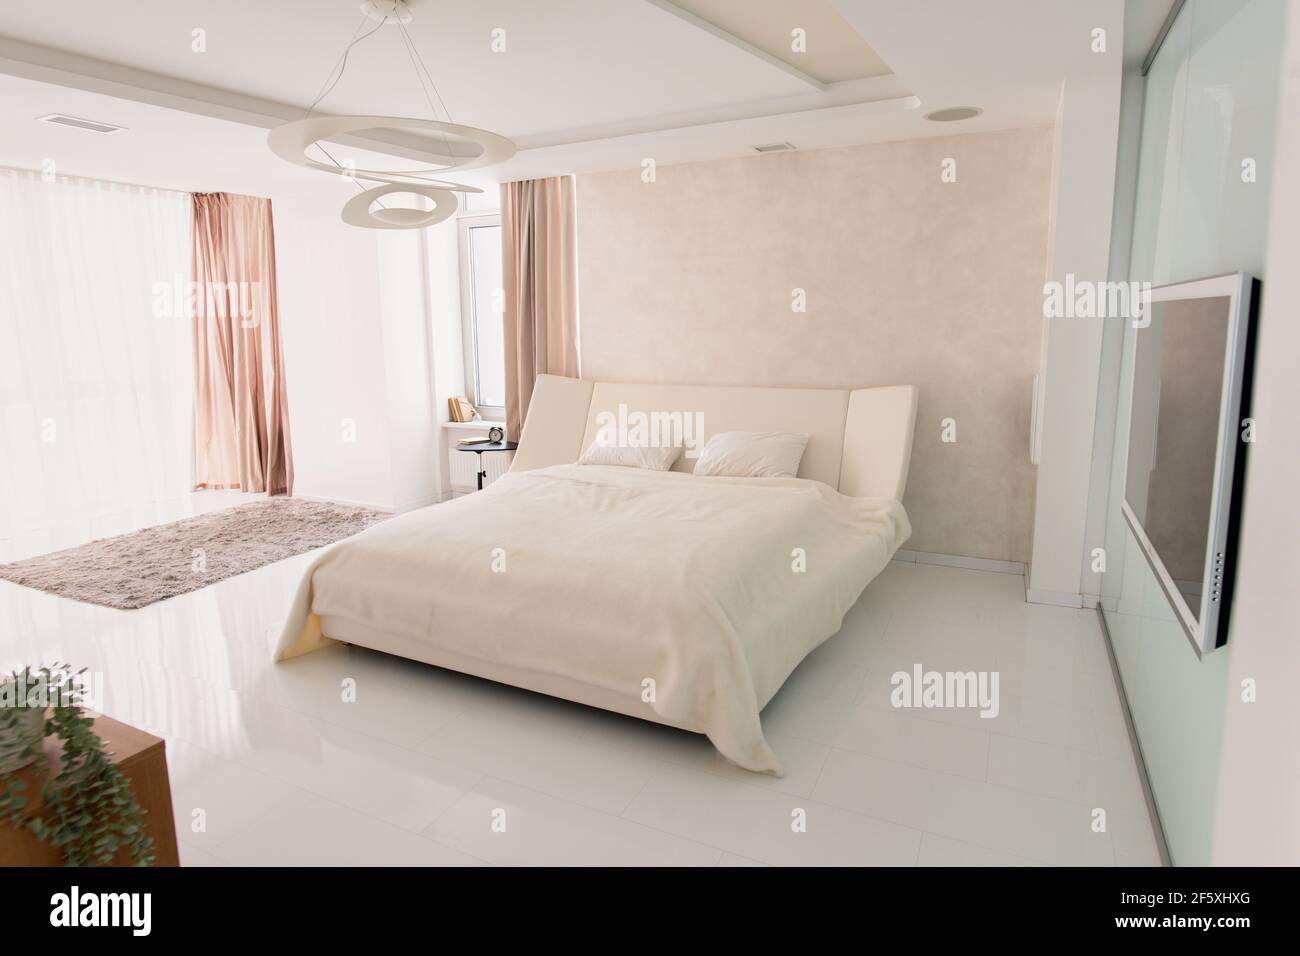 Interior of large cozy bedroom with comfortable double bed, plasma tv on wall, alarm clock on small table and grey furry rug on the floor Stock Photo